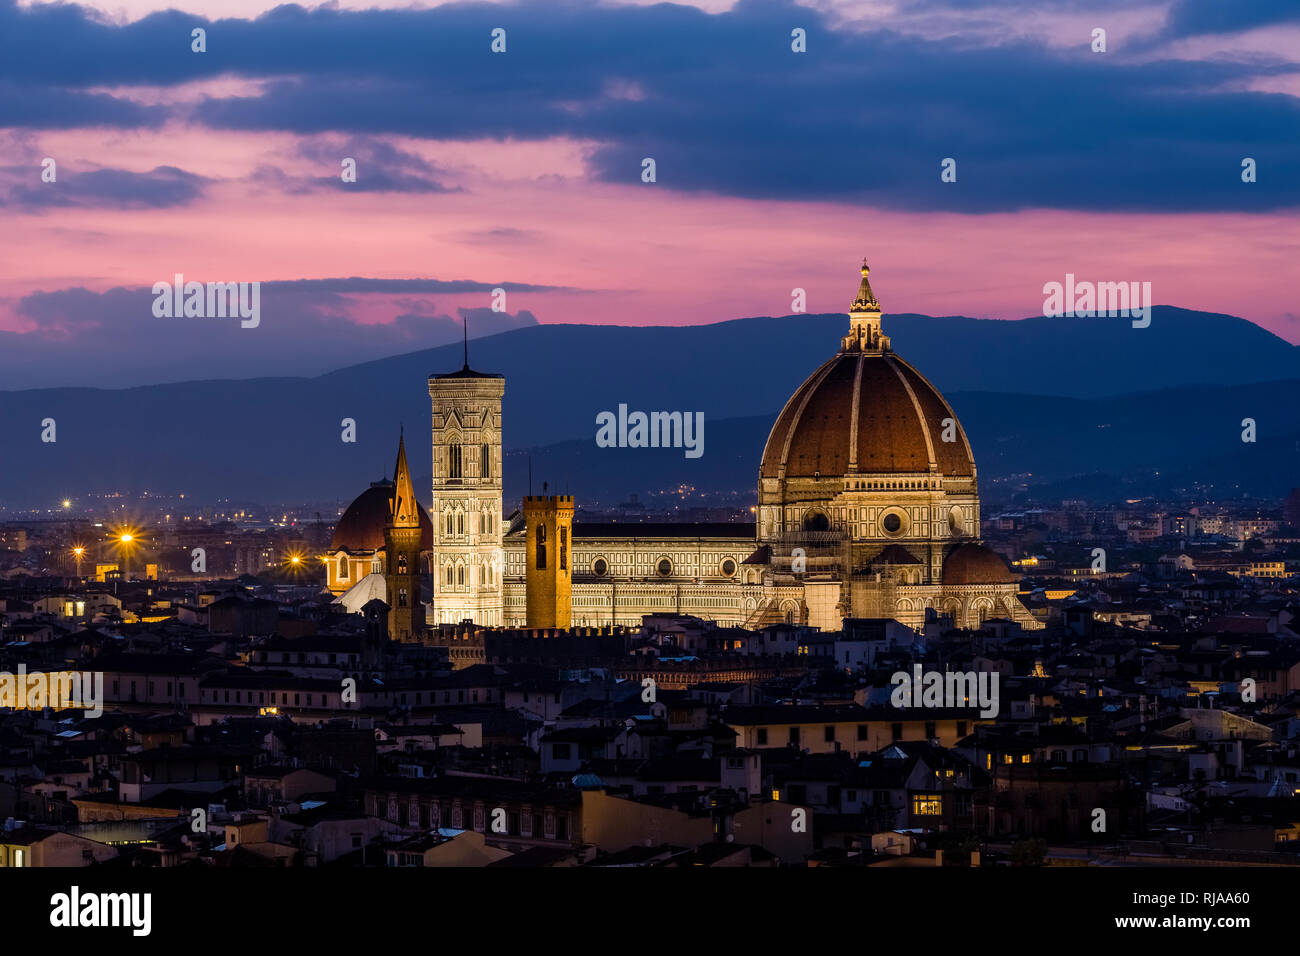 Aerial view on the illuminated town from Piazza Michelangelo at night, Duomo standing out Stock Photo